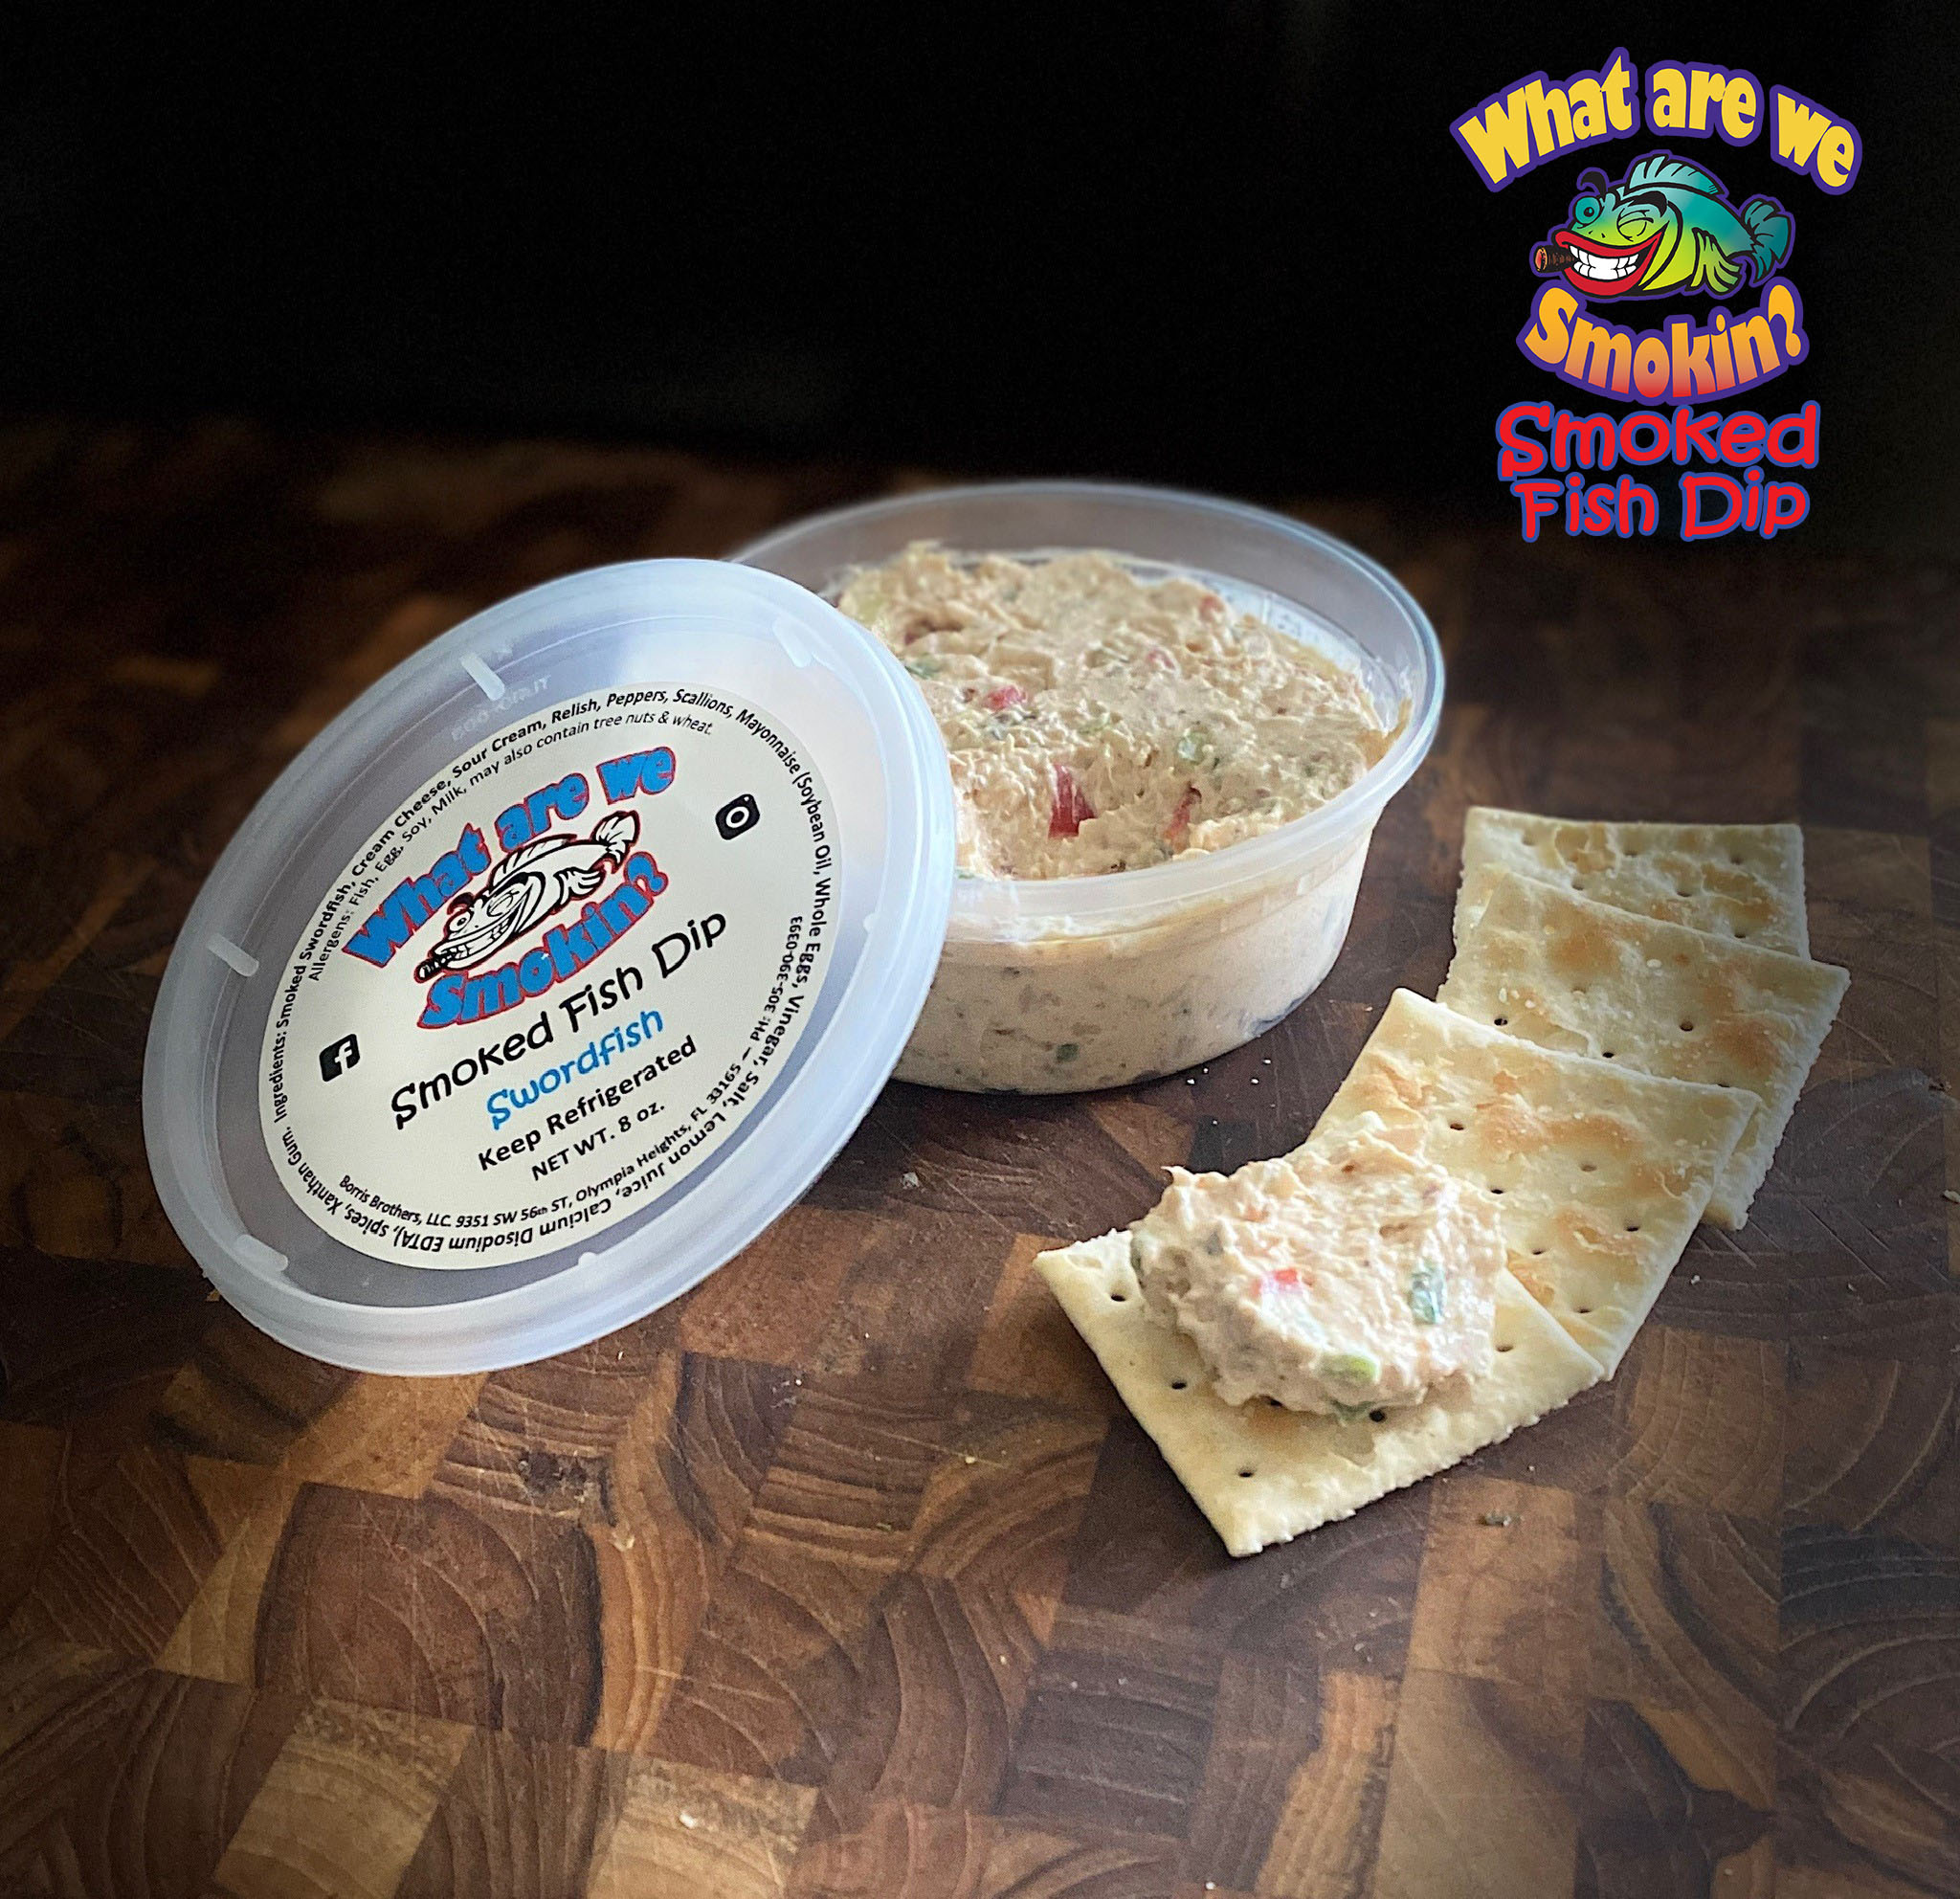 Open tub of What are we smoking smoked fish dips with crackers and logo